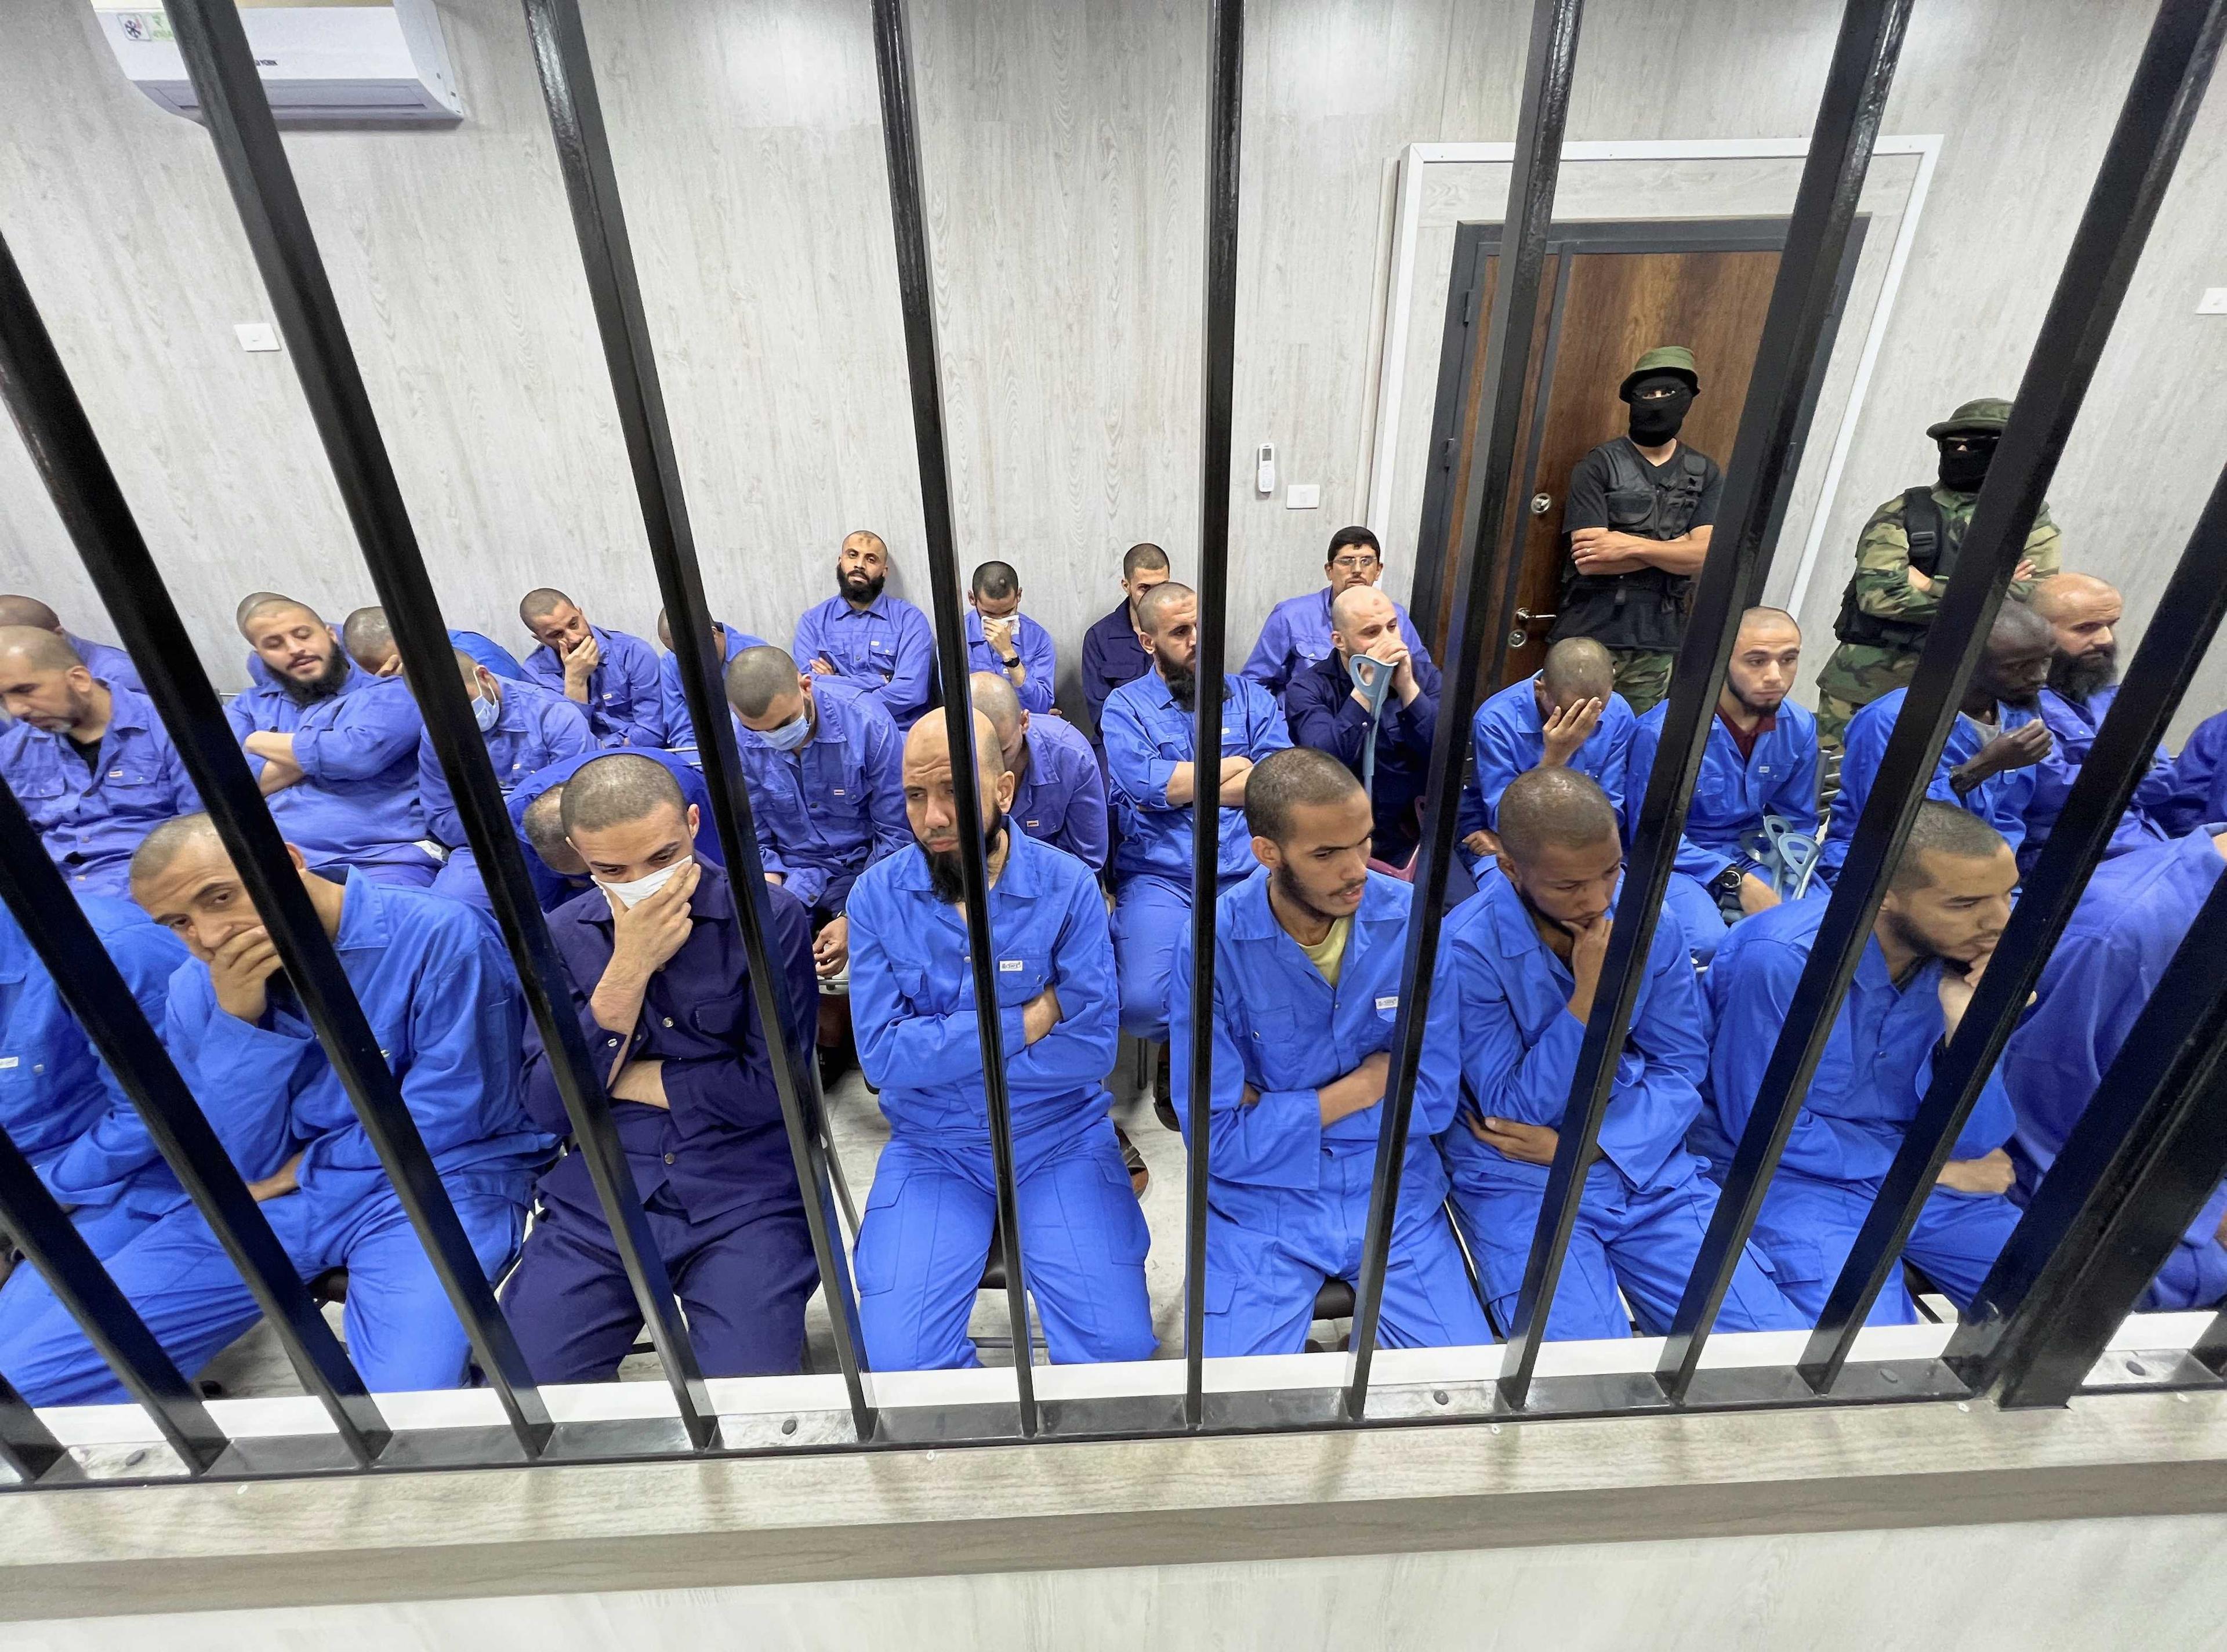 Suspects sit behind bars during a judgment sentence against 56 defendants accused of joining Islamic State group in the court in Misrata, Libya, May 29. Photo: Reuters